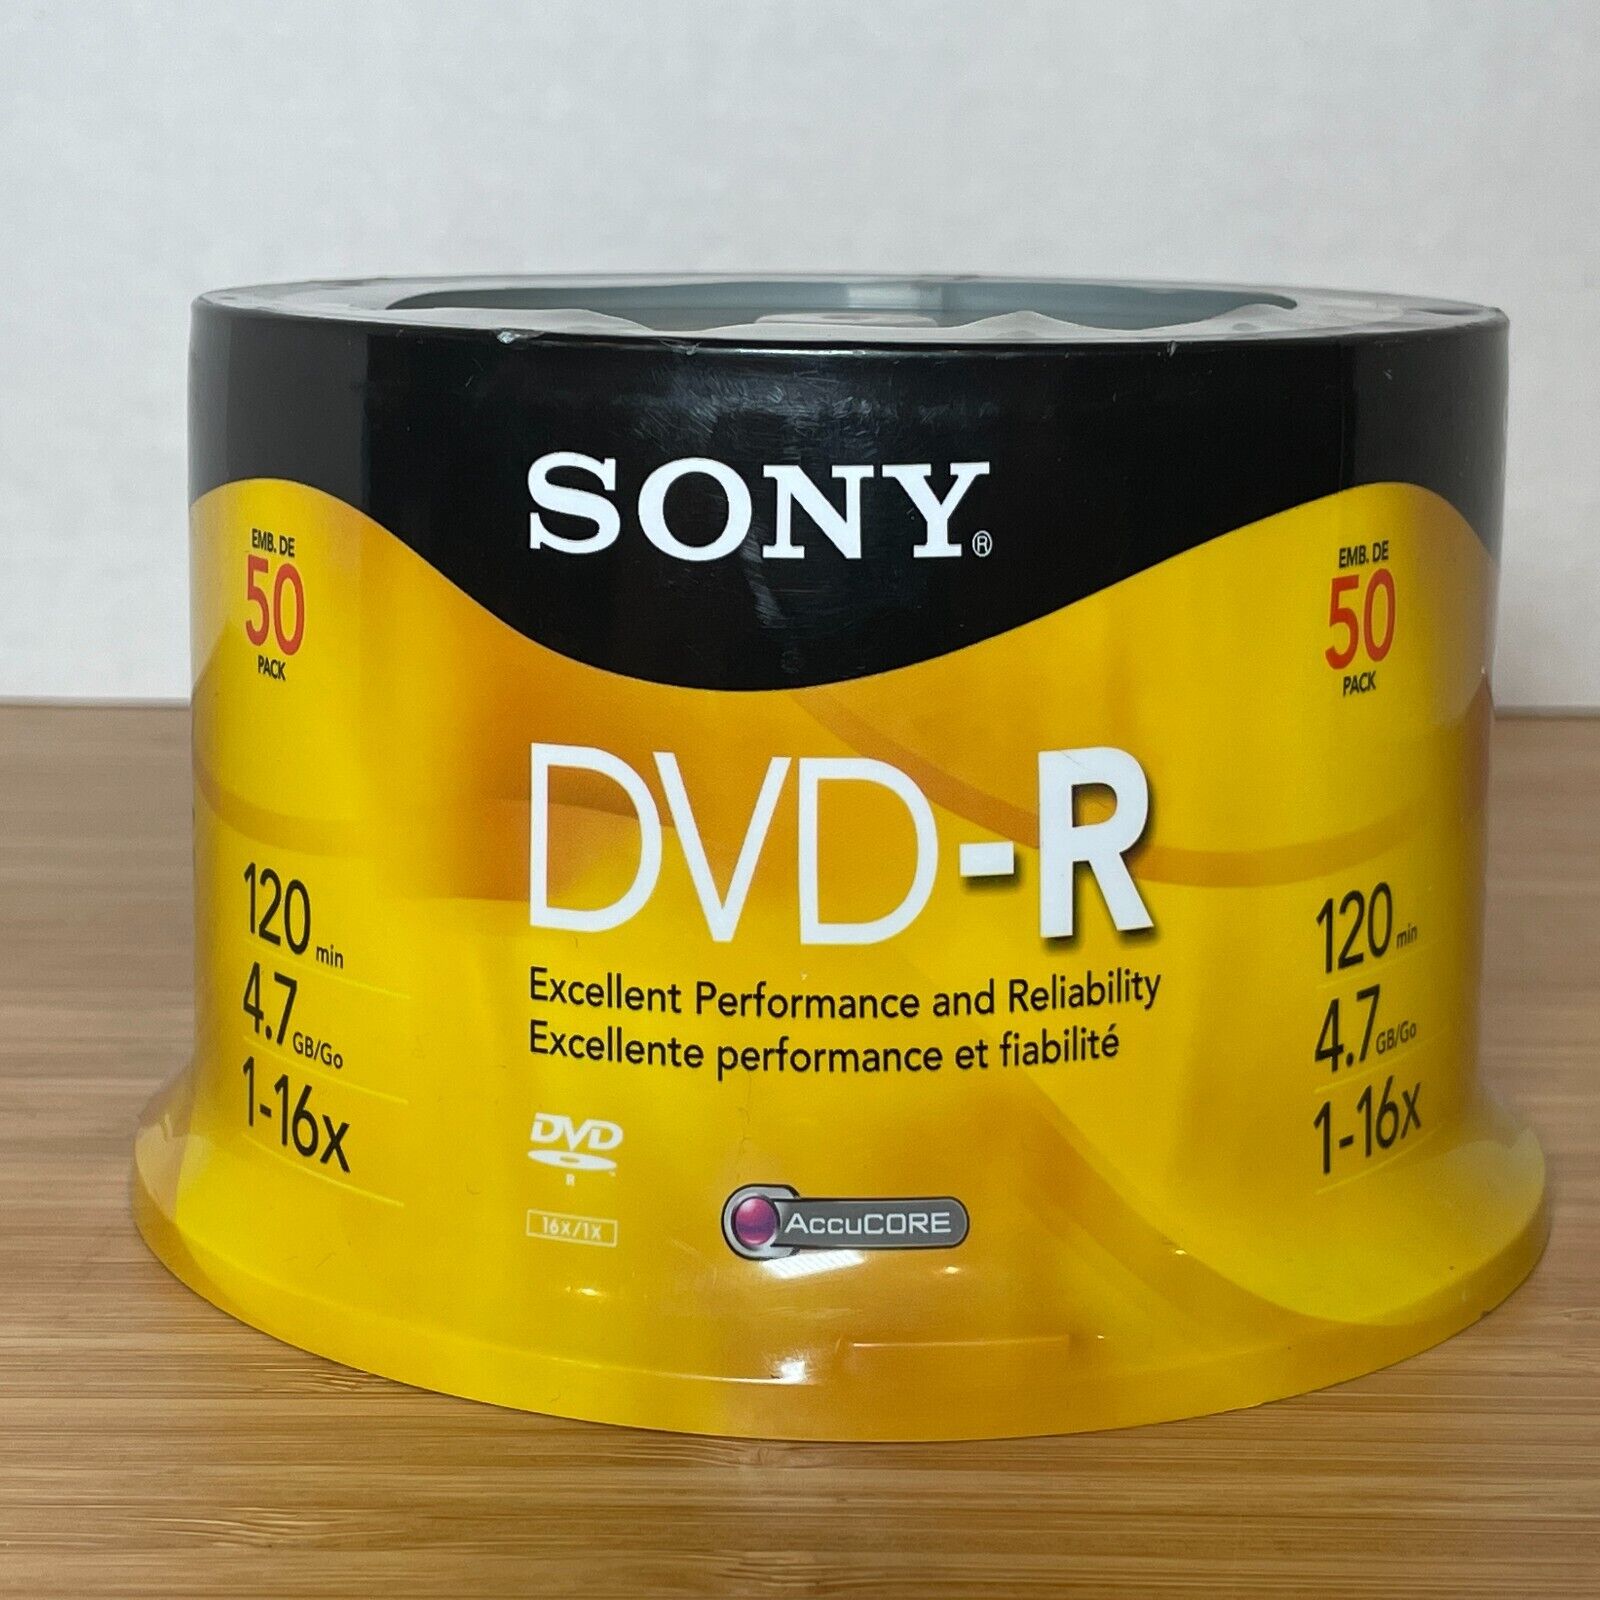 Sony DVD-R 50 Pack 4.7 Gb 120 Mins 16x Recordable Spindle Discs New